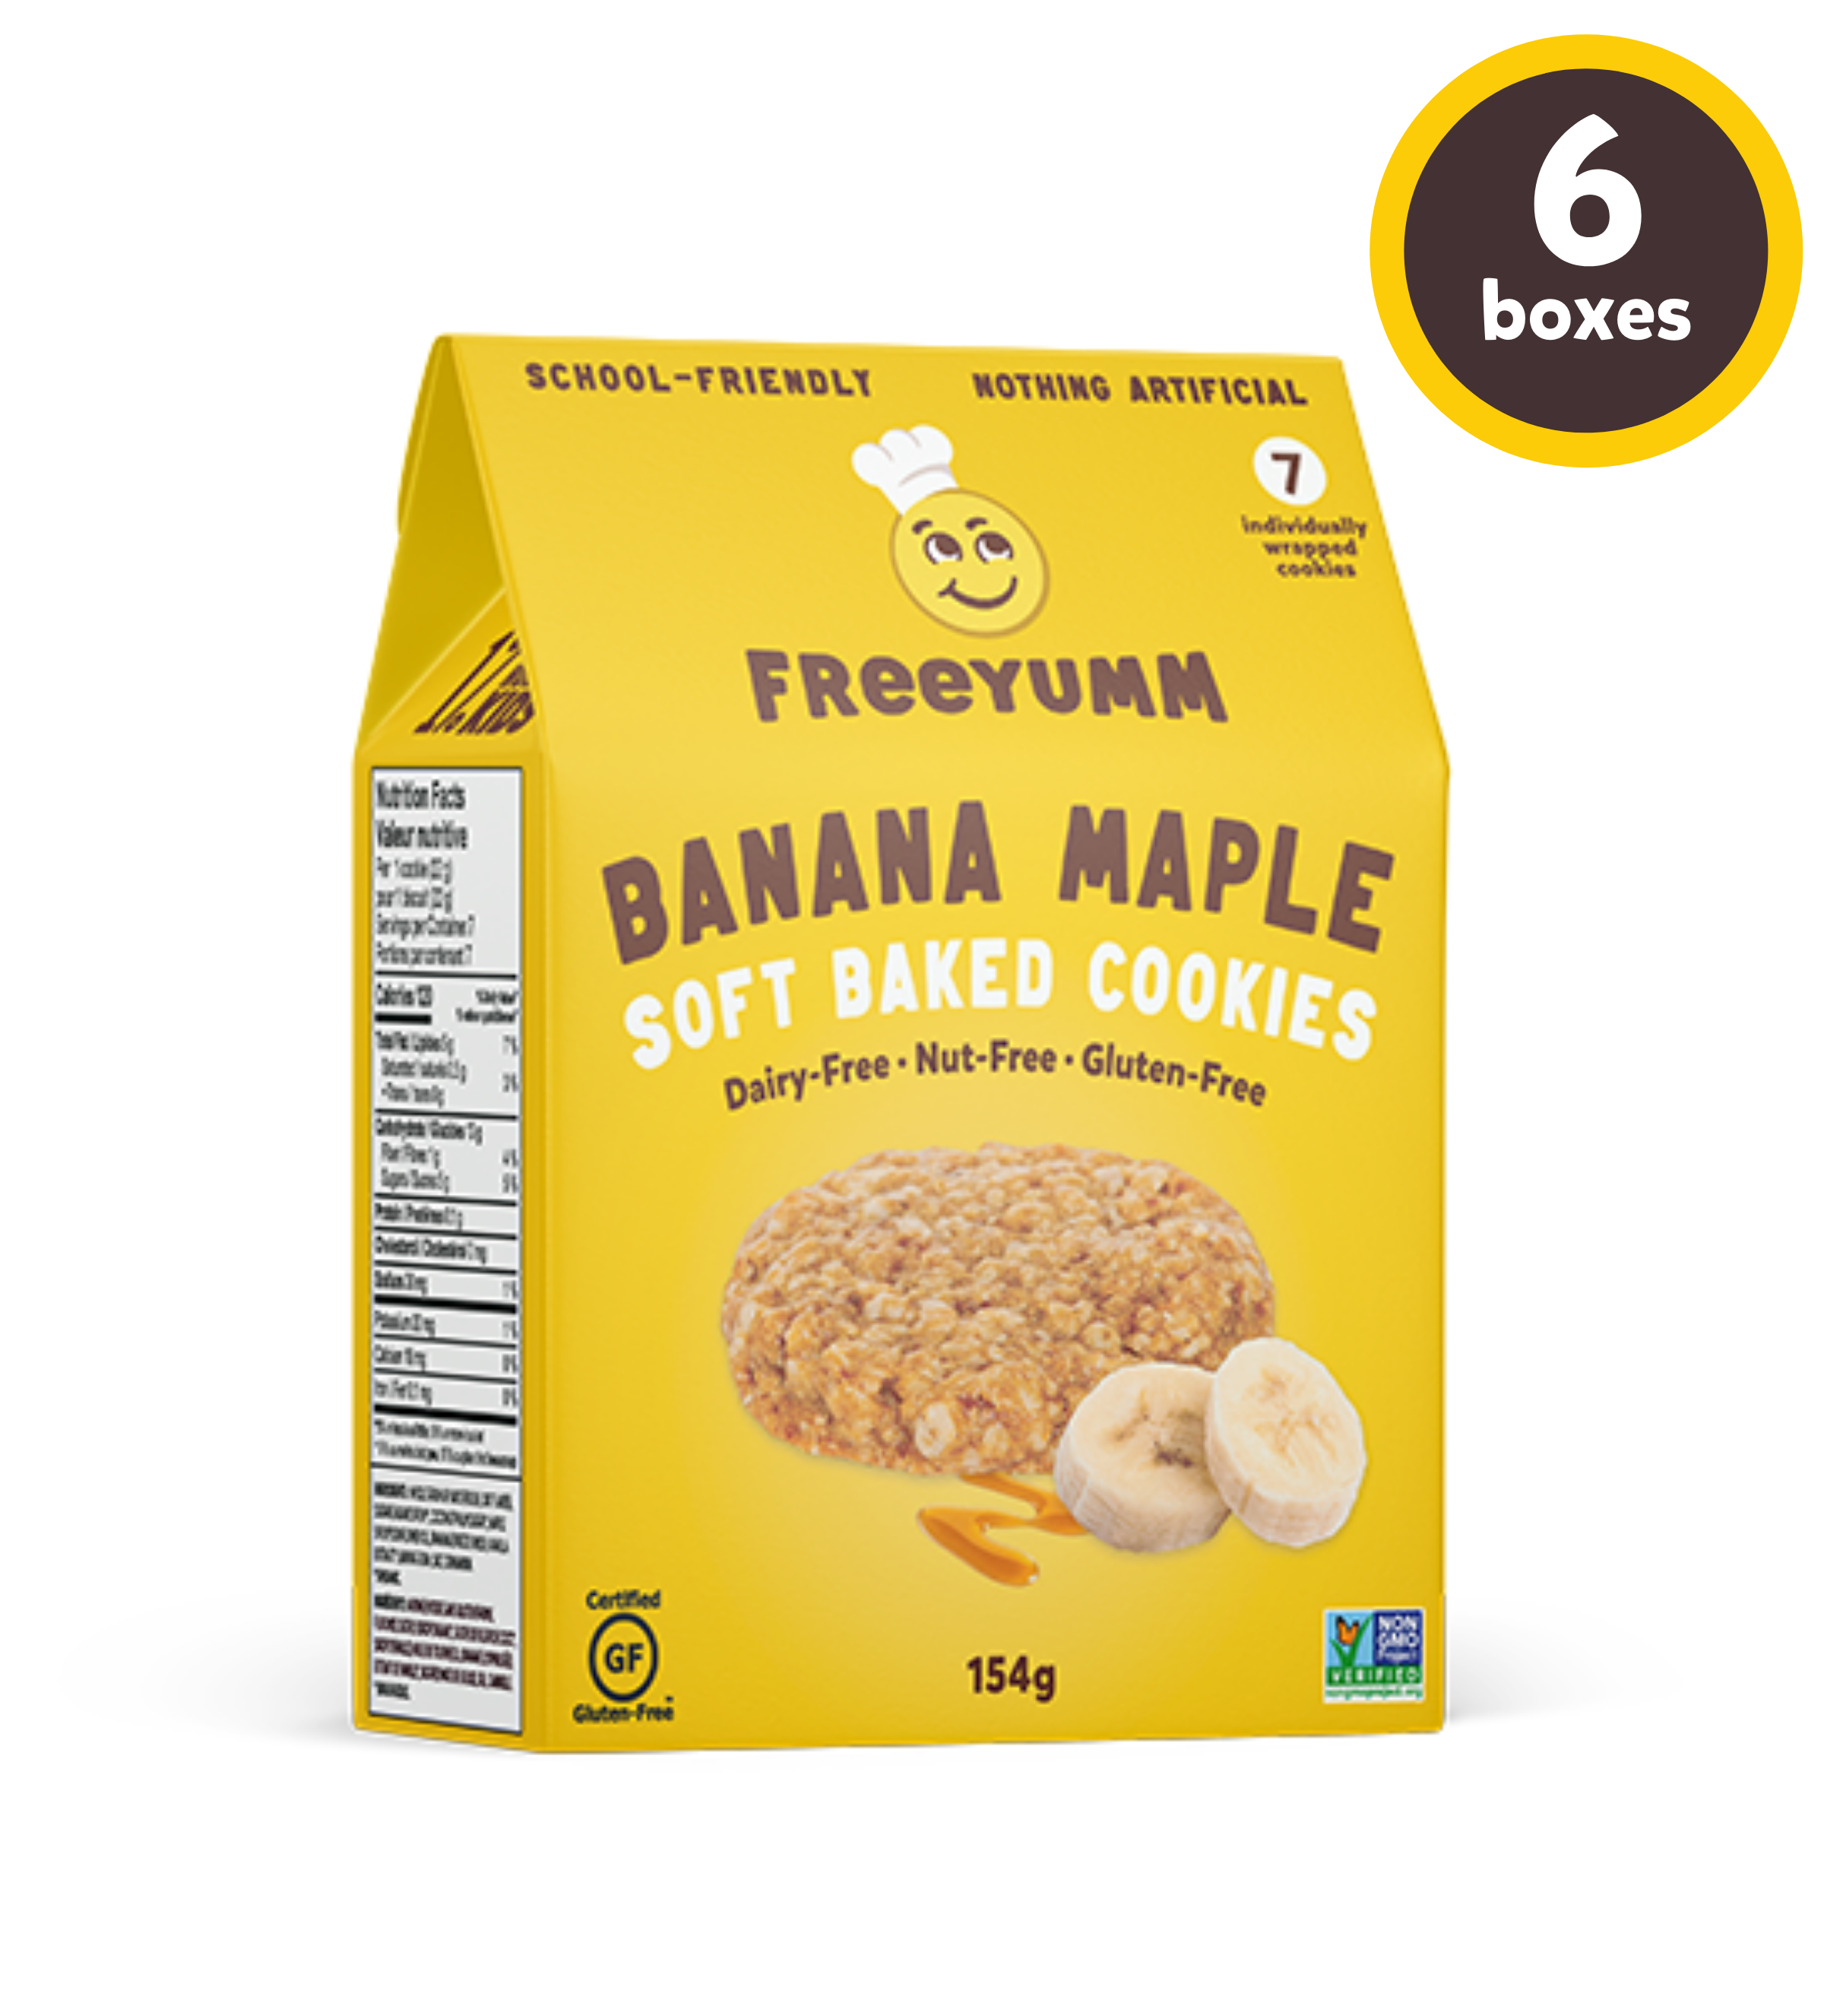 BANANA MAPLE SOFT BAKED COOKIES